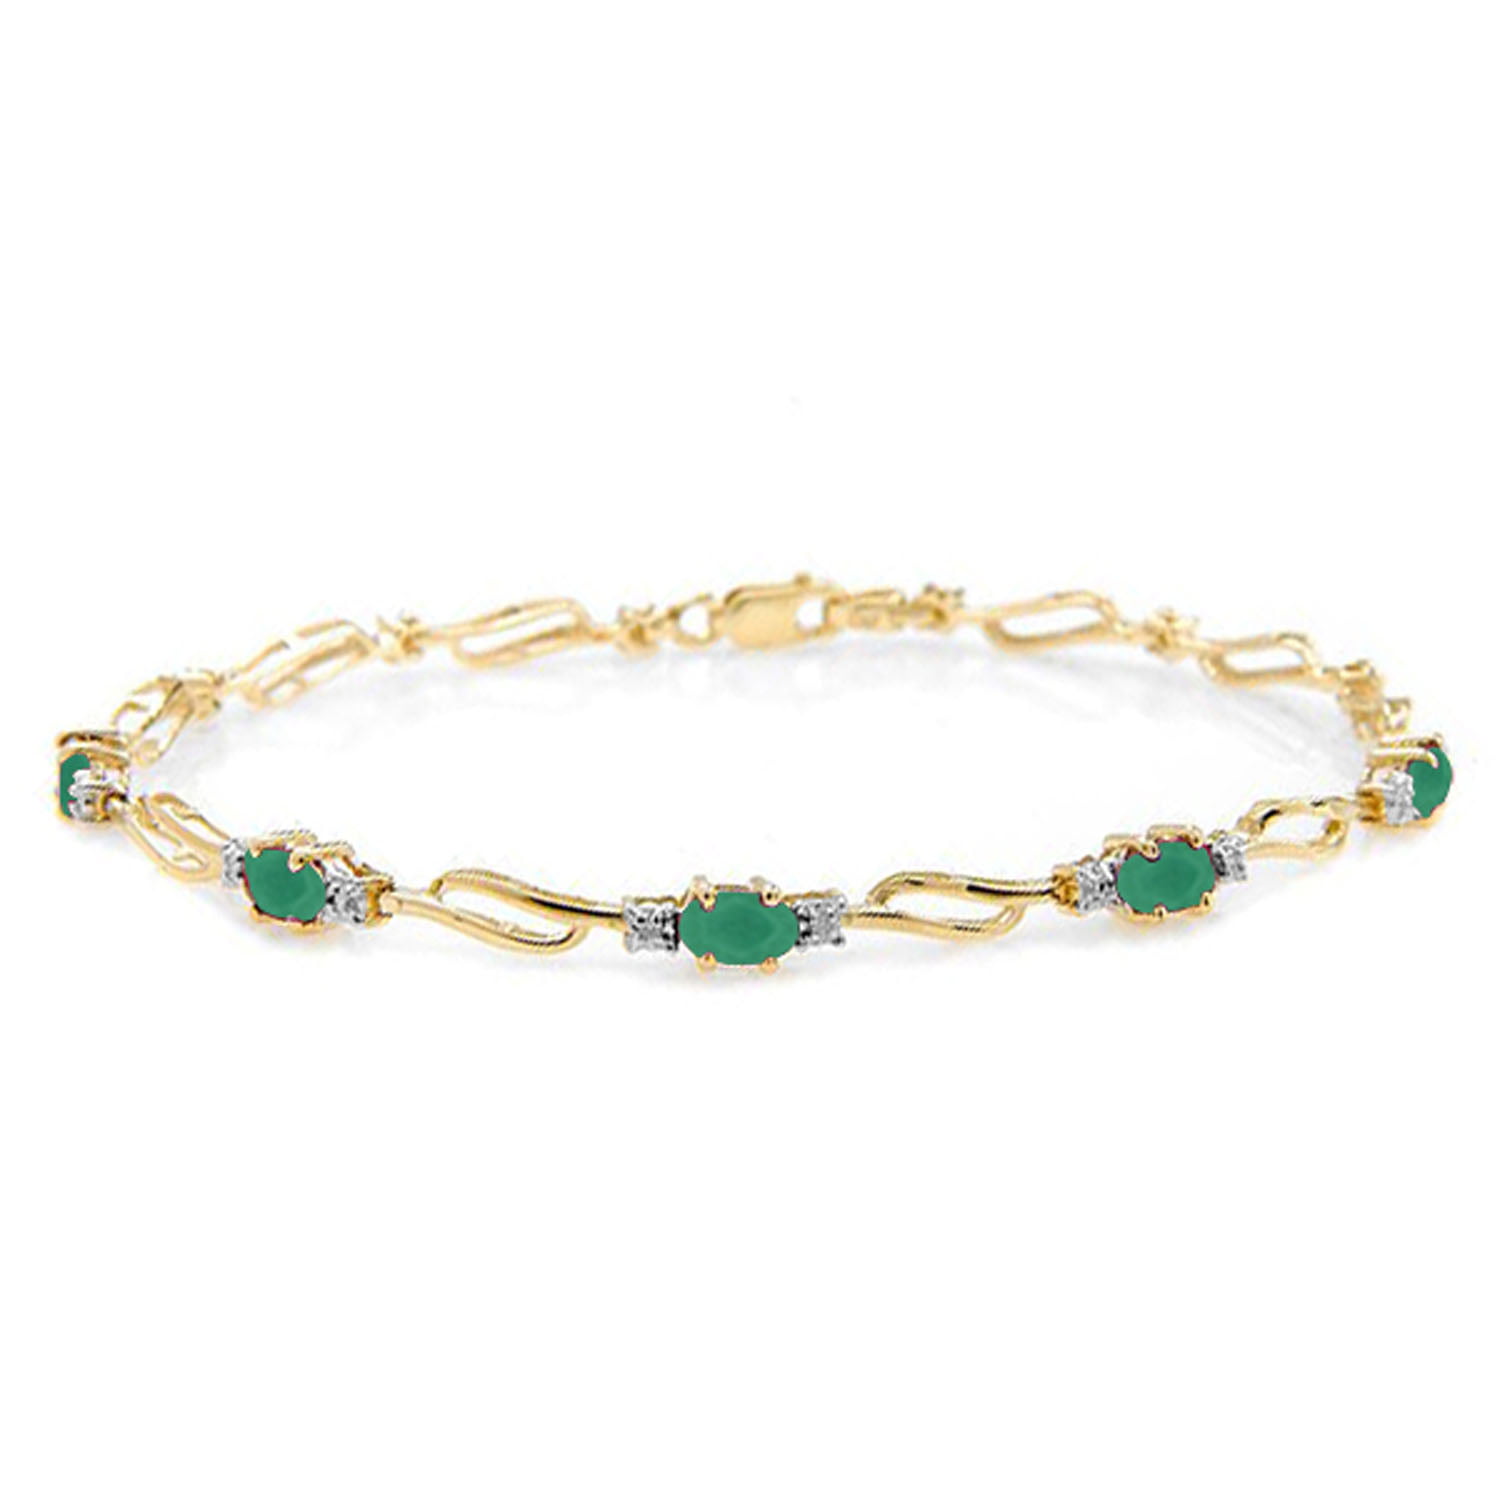 Galaxy Gold 14k Solid Gold Tennis Bracelet with Natural Emeralds 